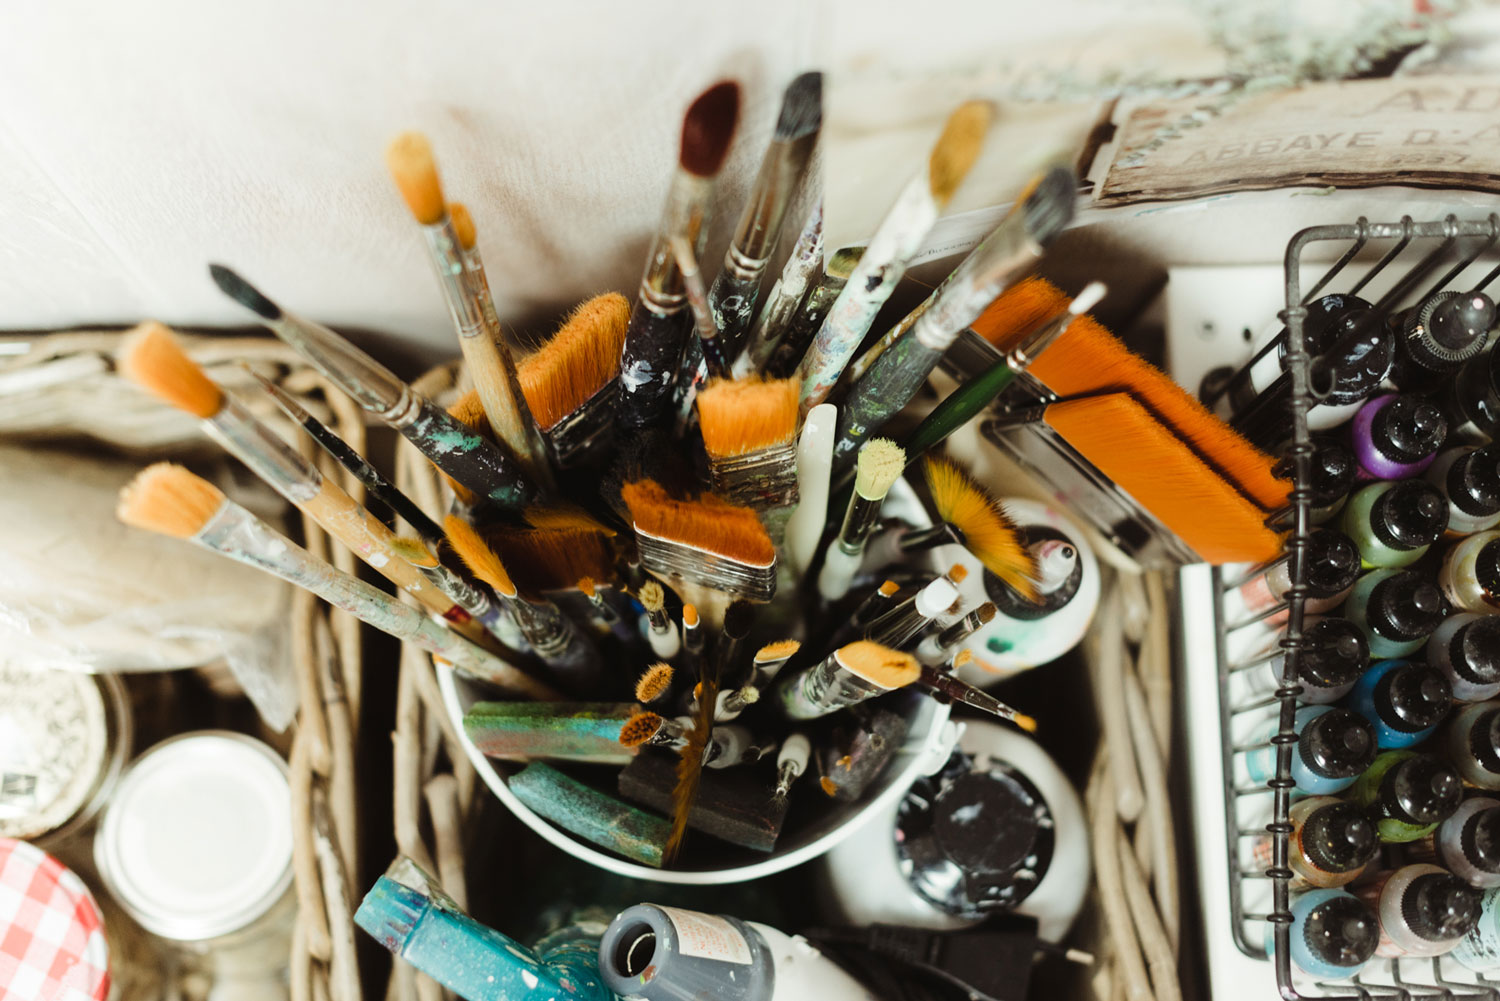 Favorite mixed media art supplies: the whole list! — Laly Mille